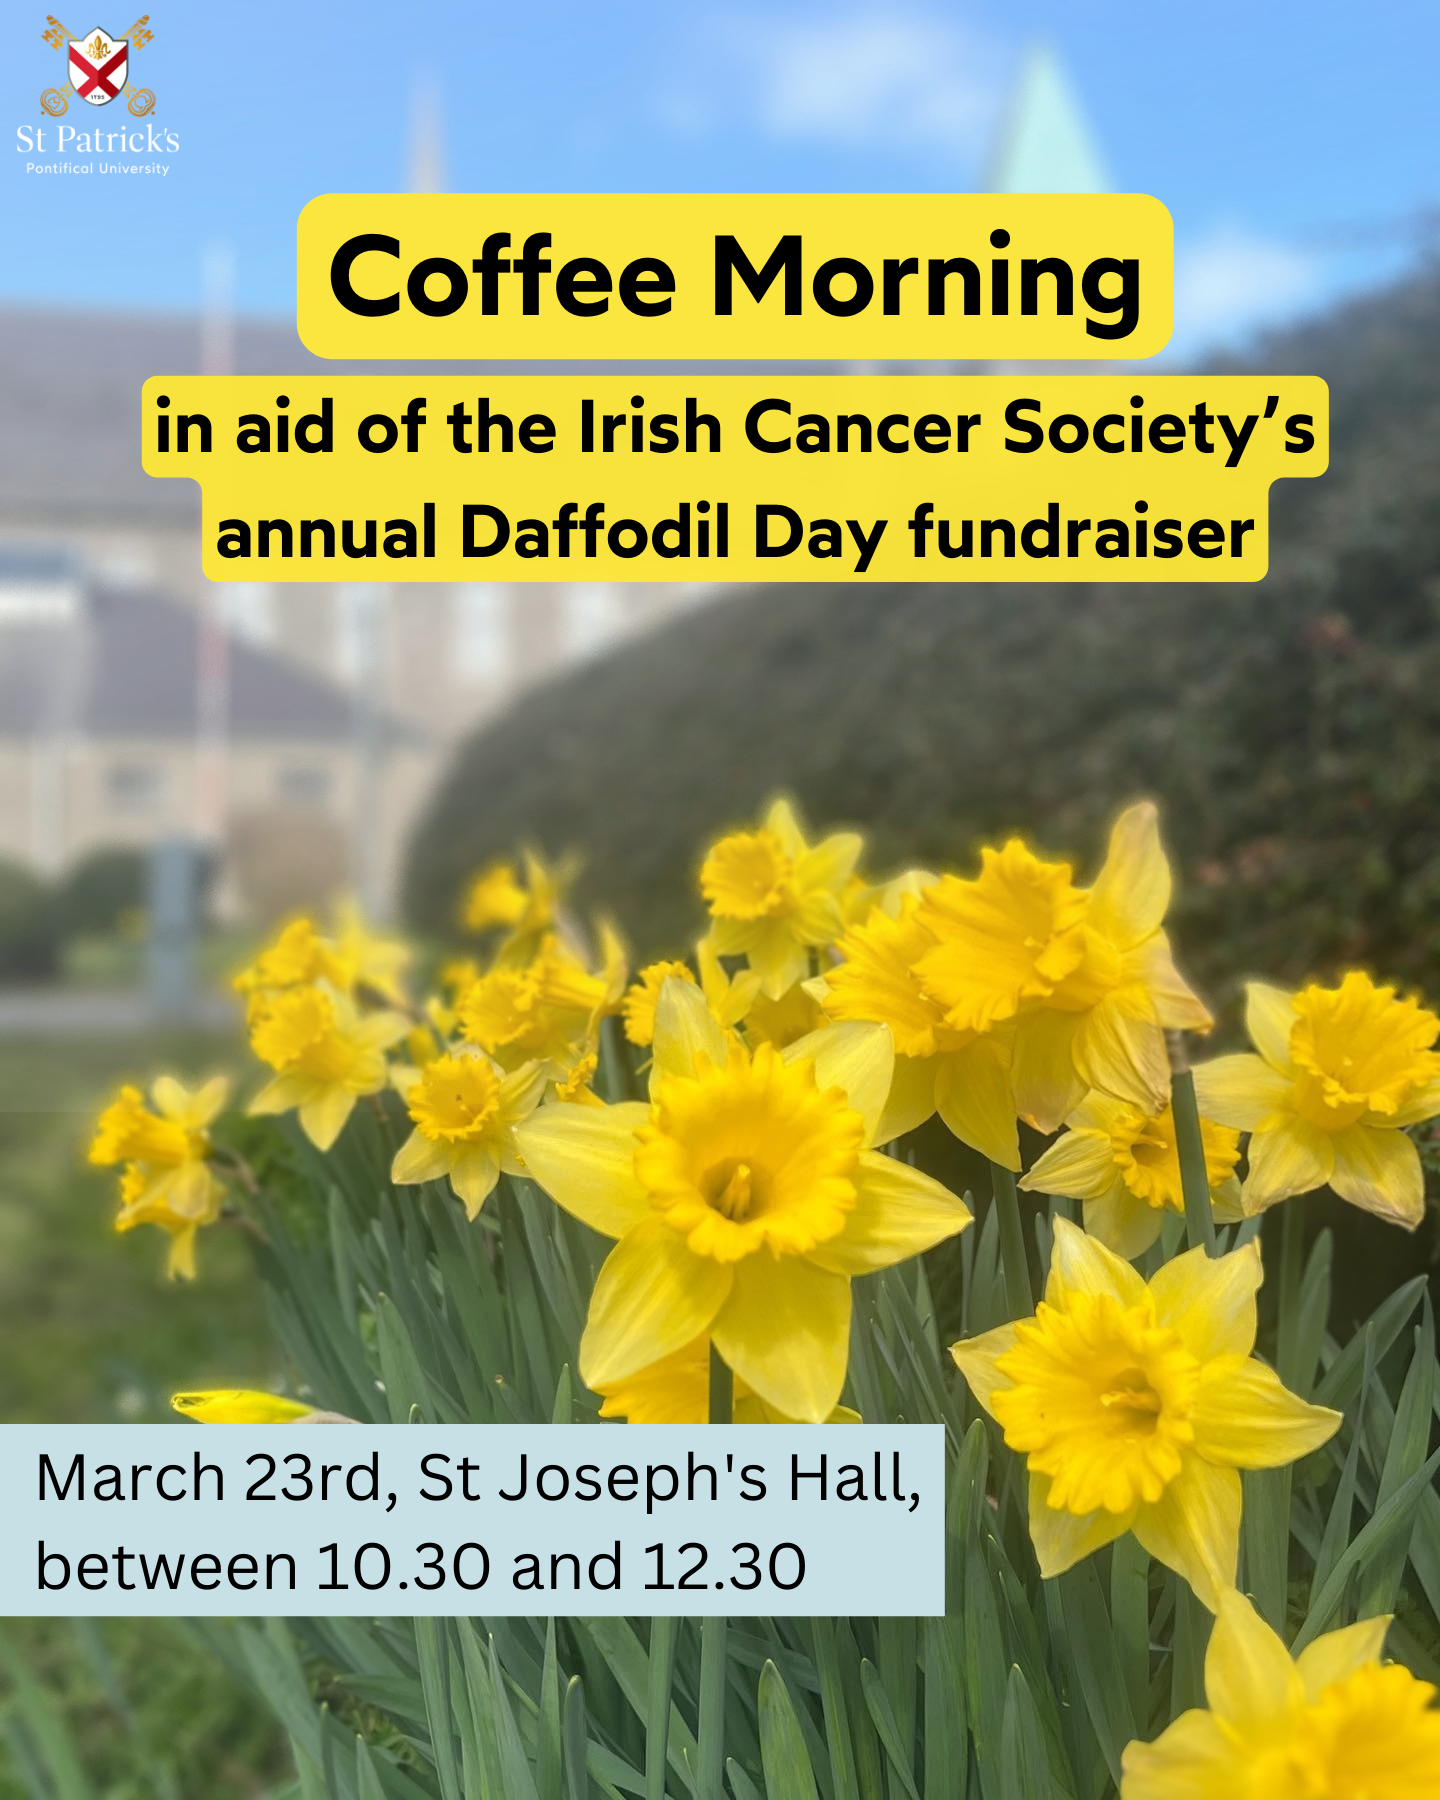 Coffee-Morning-March-23rd-St-Josephs-Hall-1.png#asset:14055